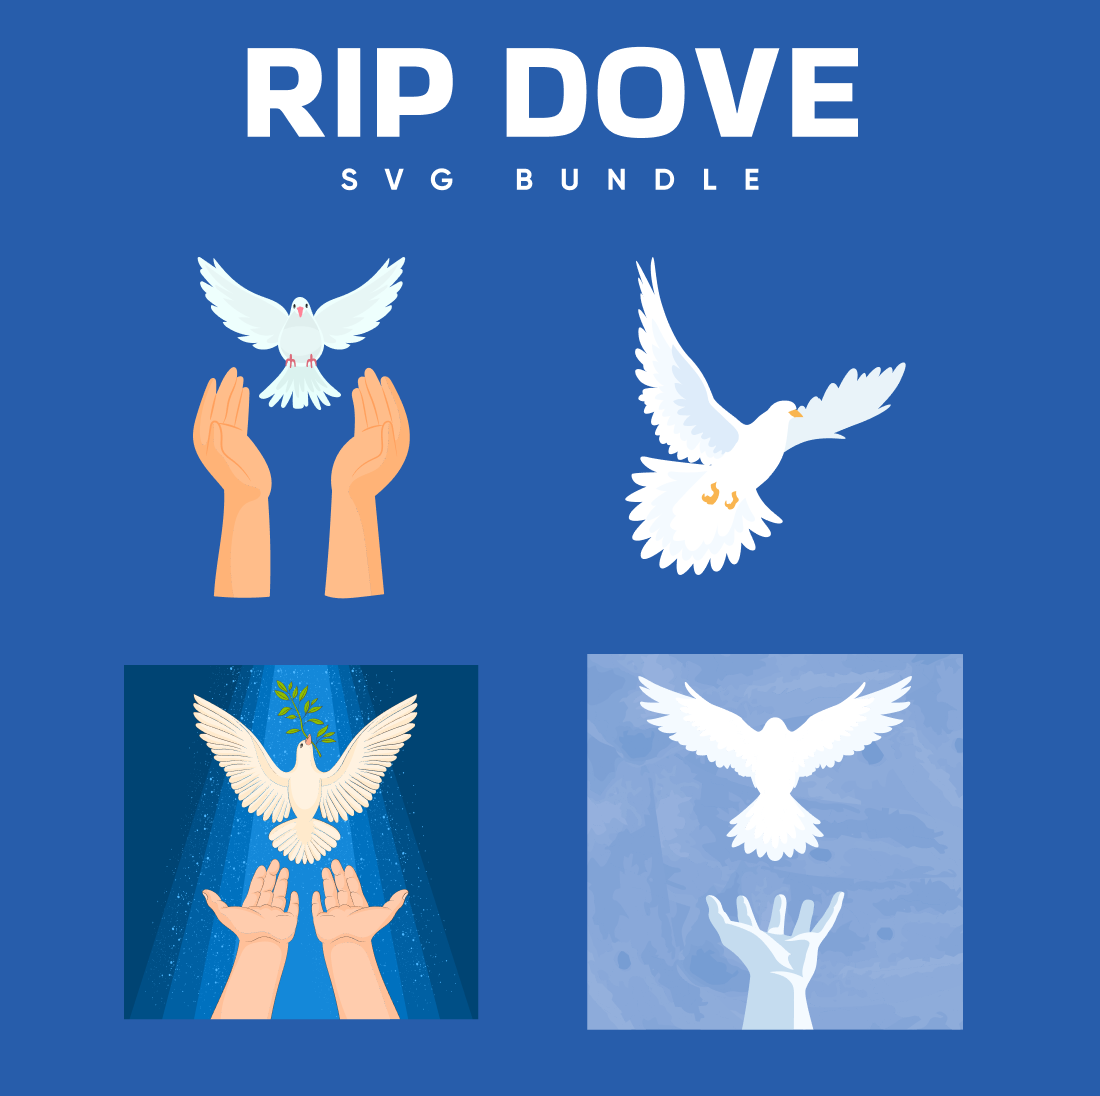 Blue background with white doves and hands.